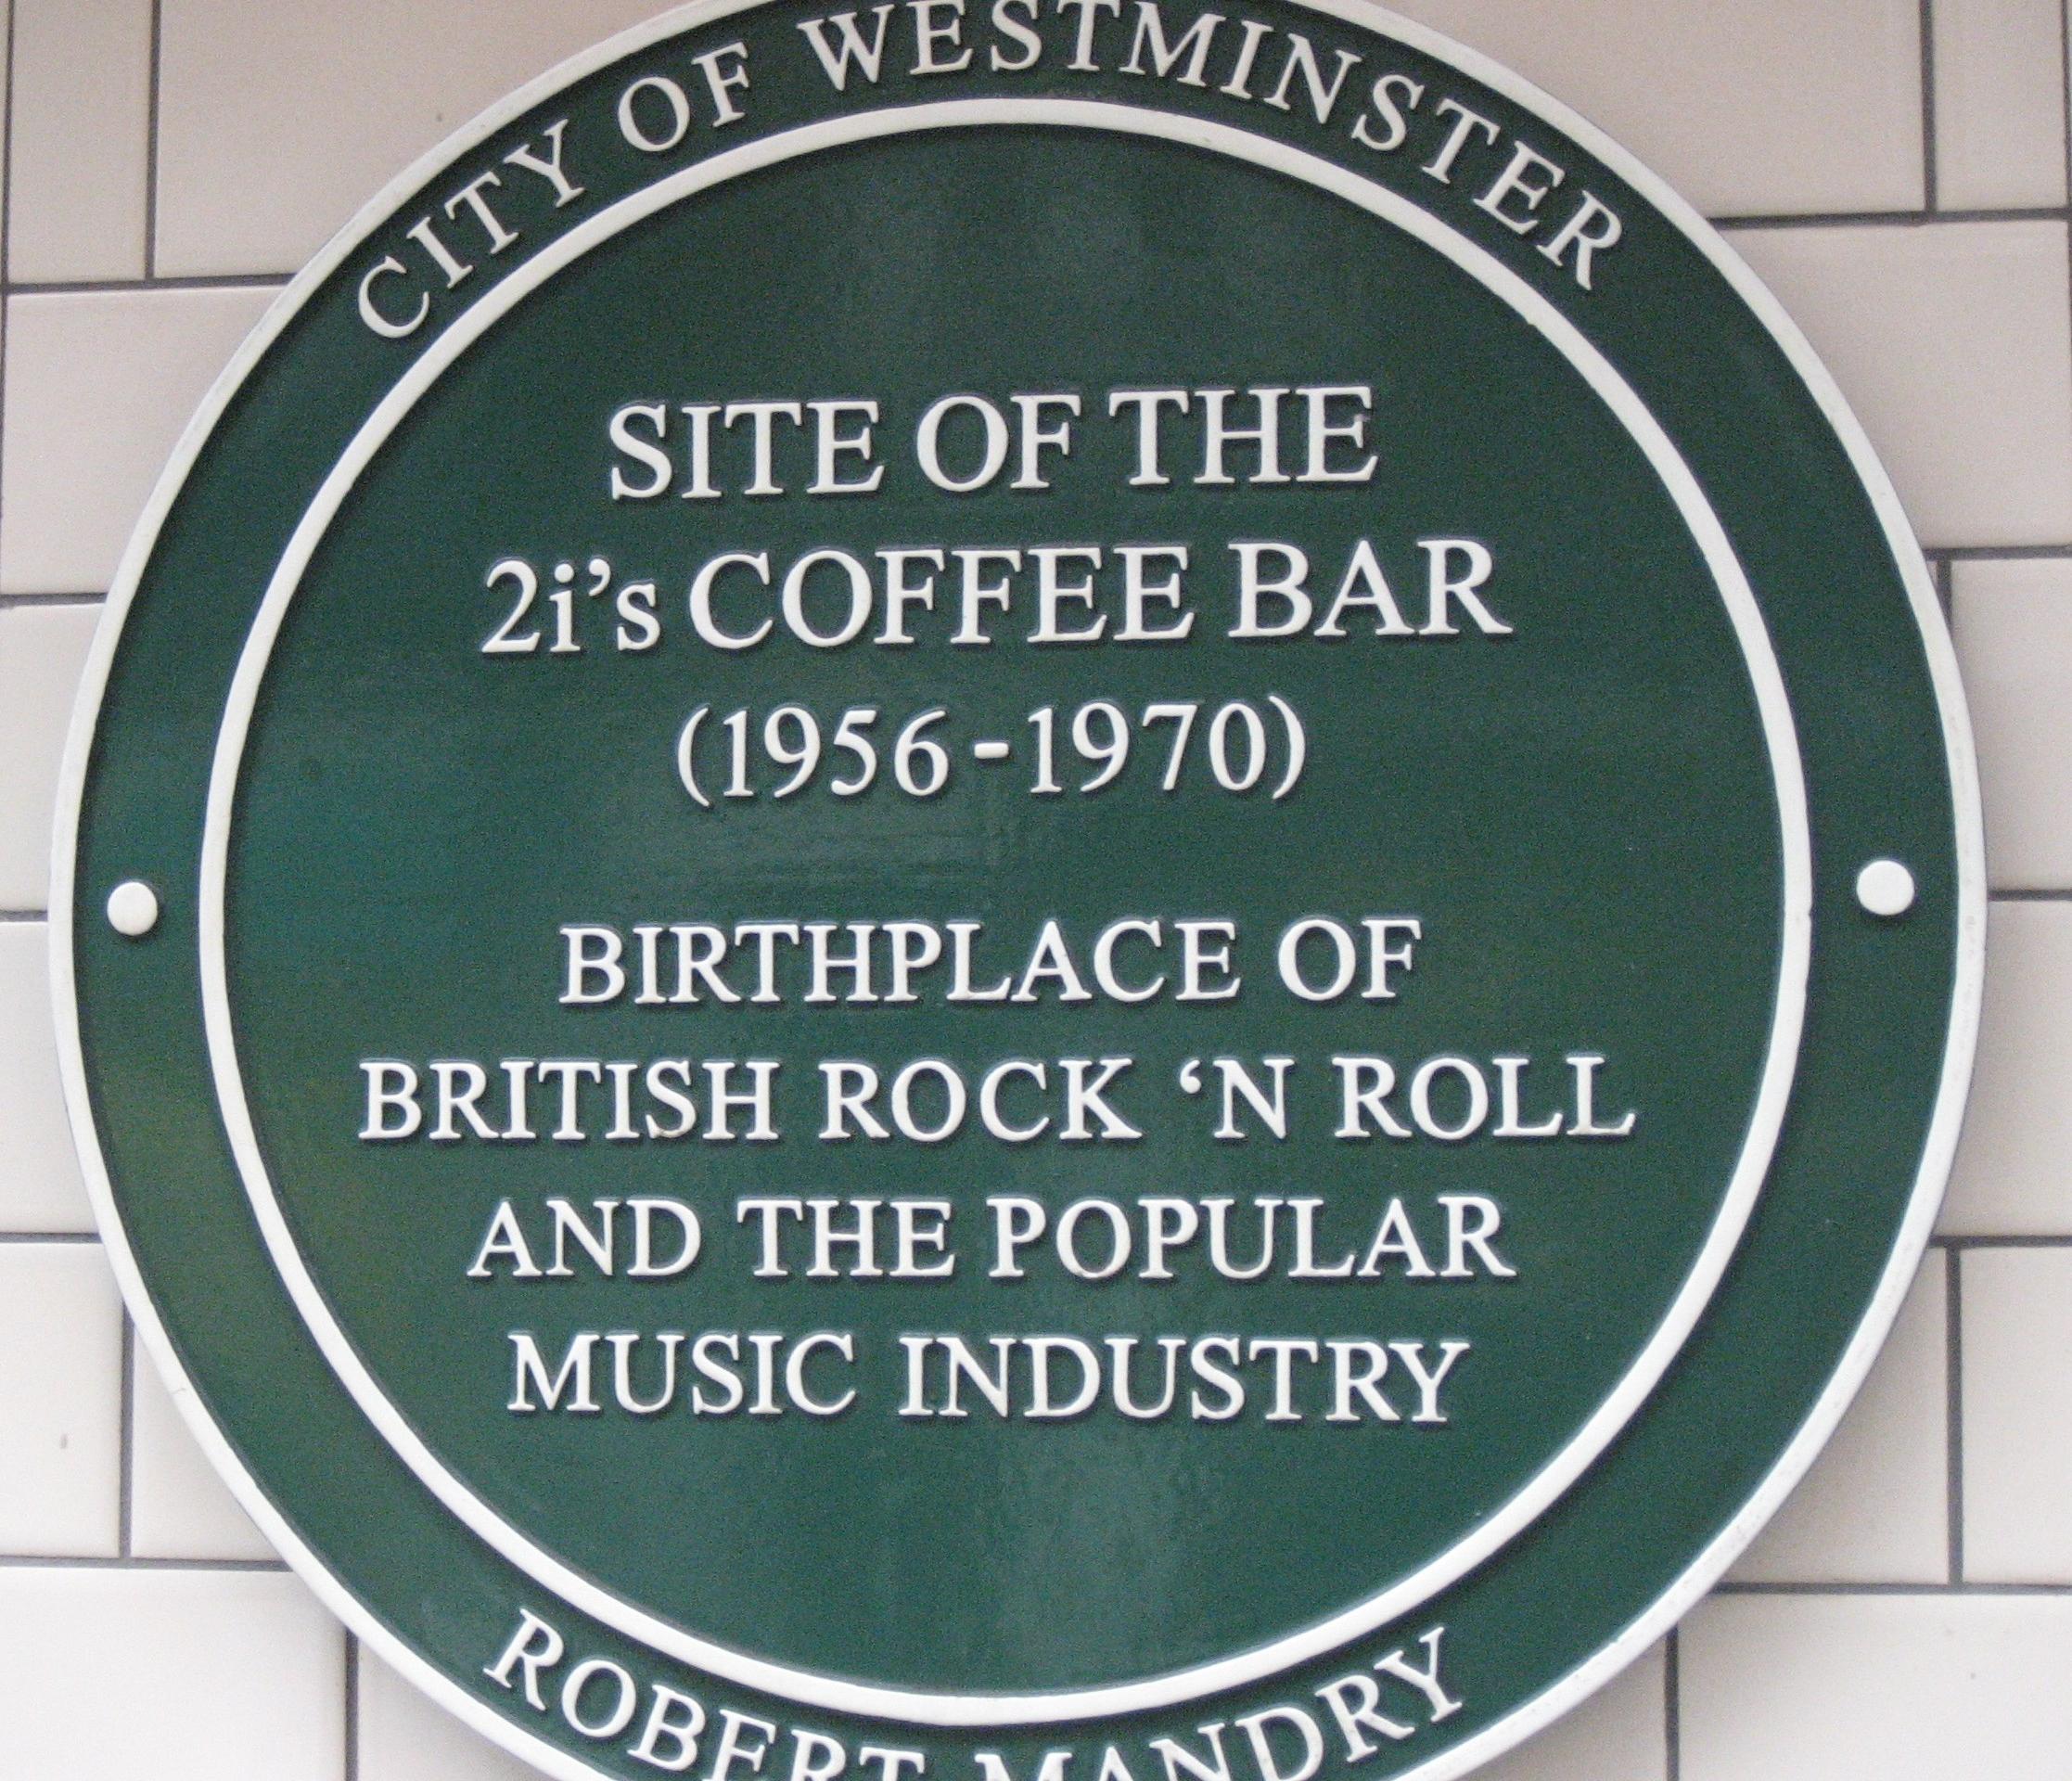 Guided tour of London in a rock and roll themed bus – Morning tour